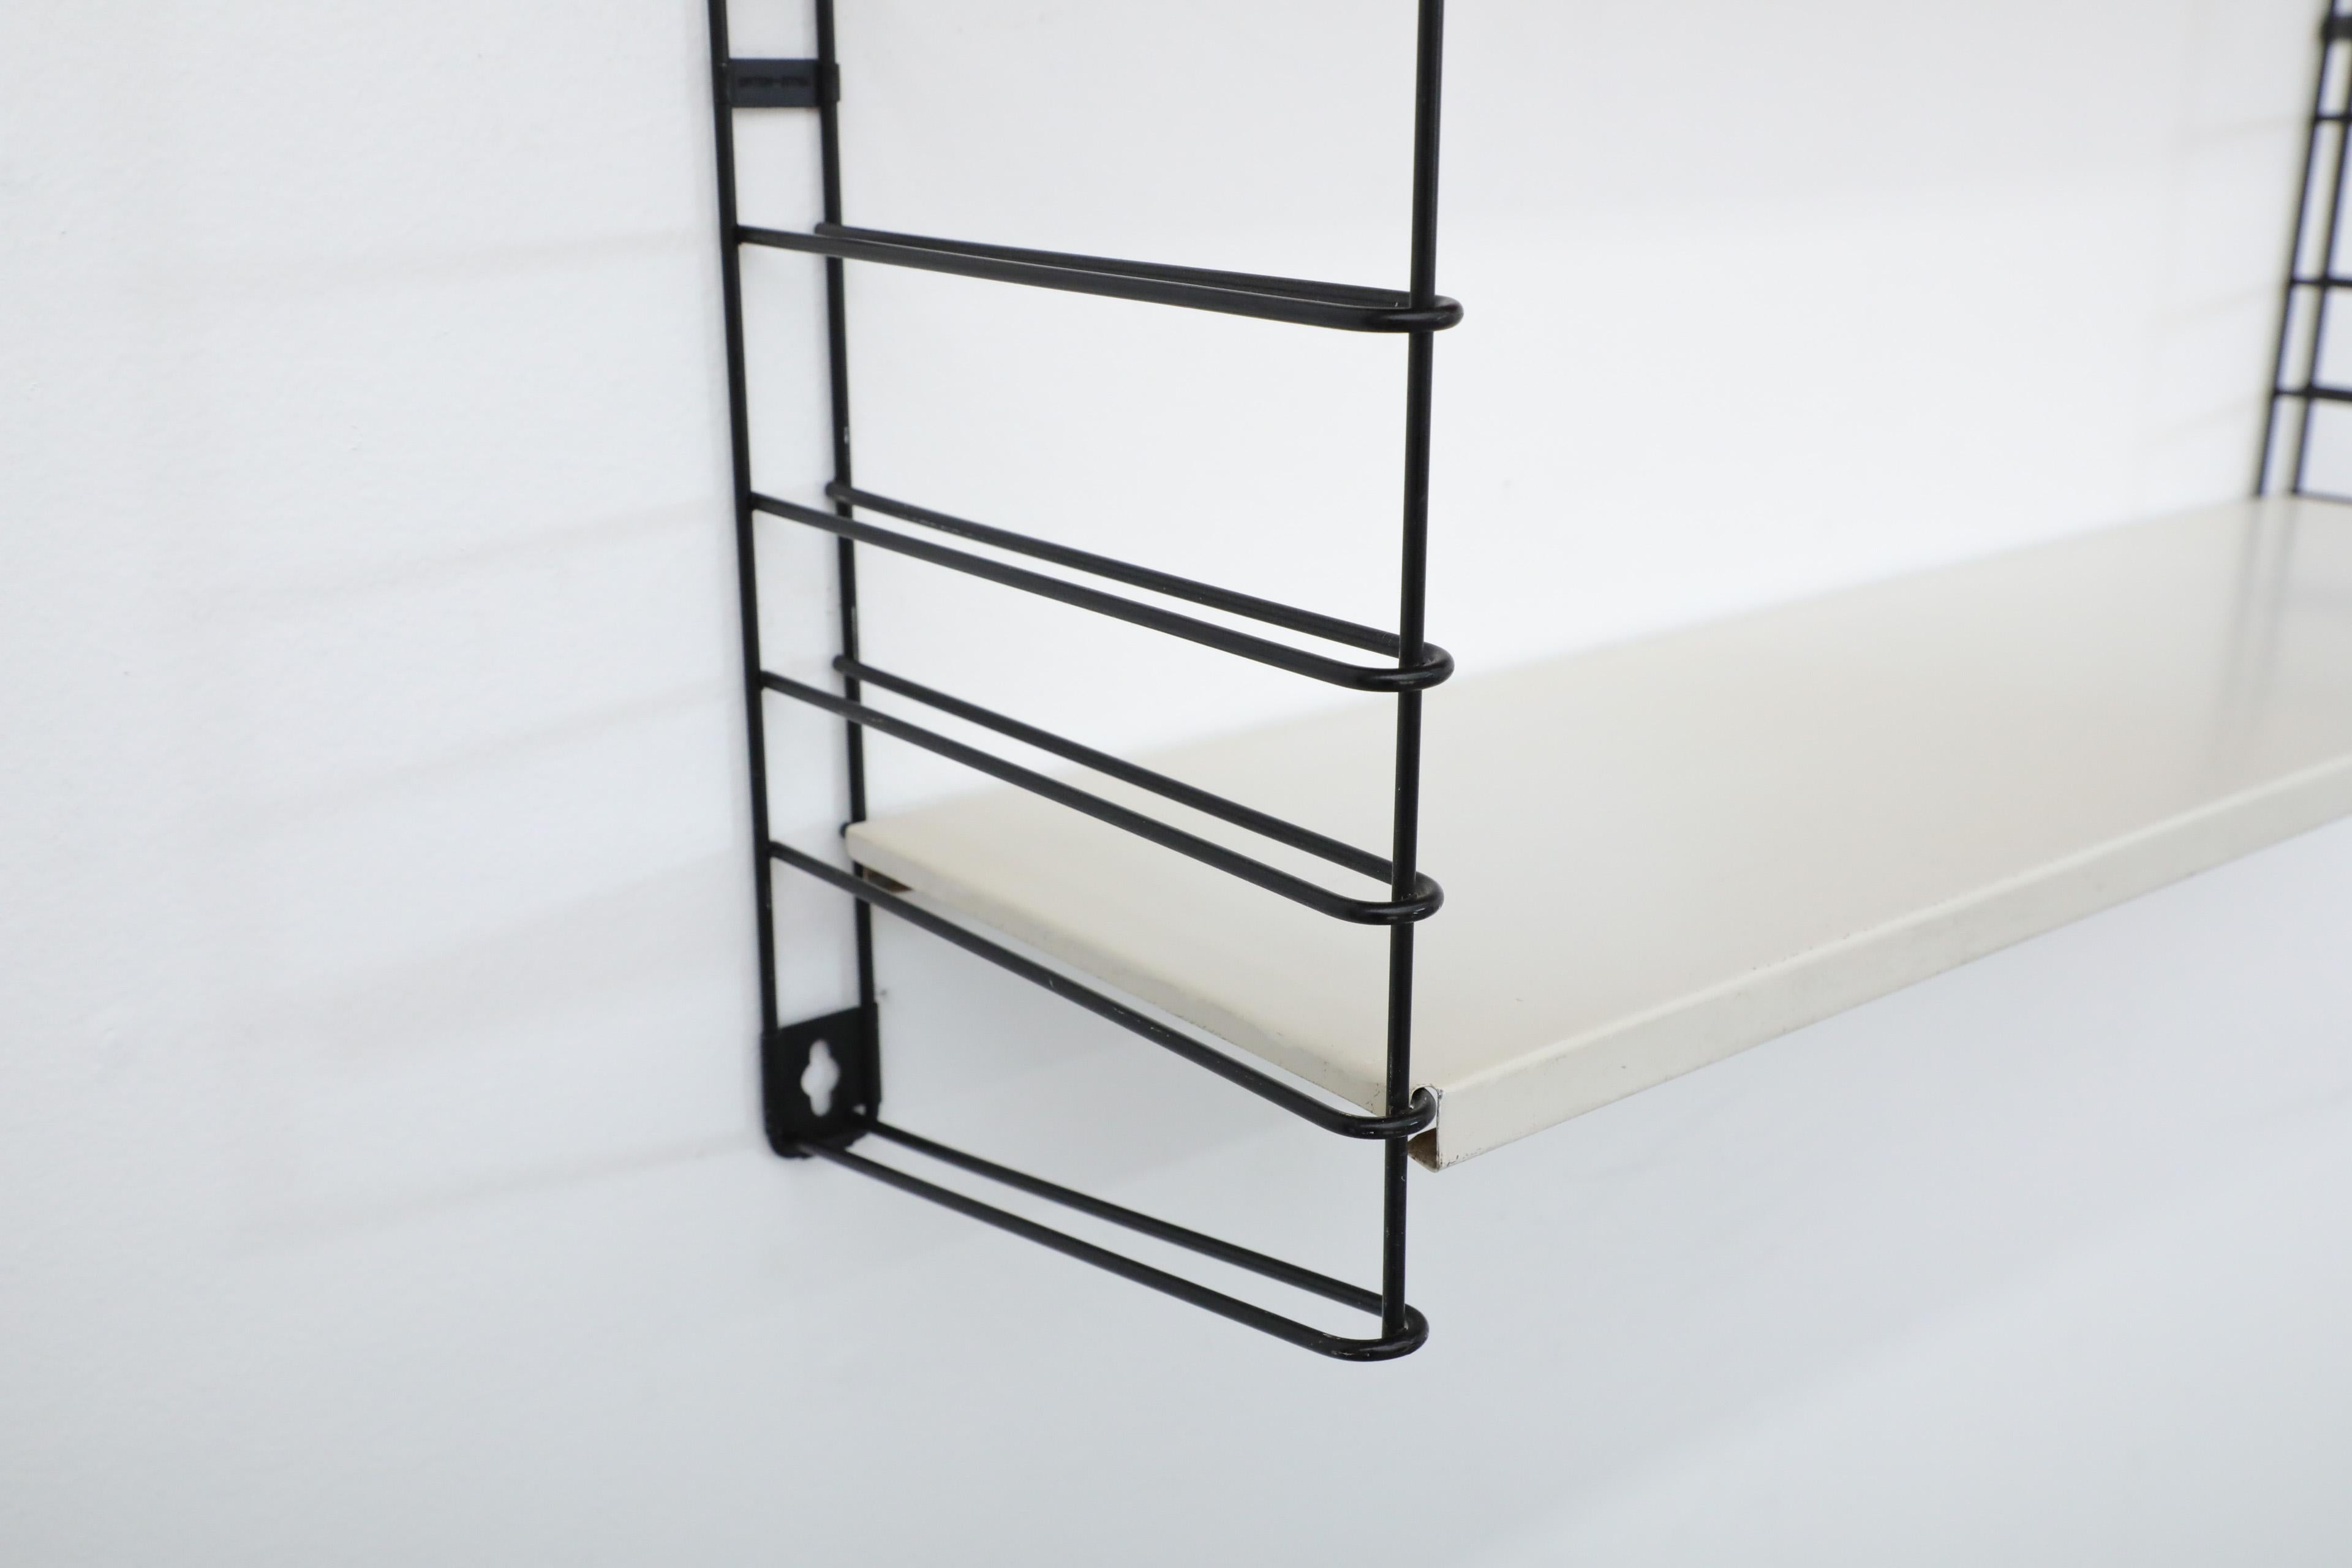 Mid-20th Century Tomado Wall Mount Black Wire Shelving Unit with Red and White Shelves For Sale